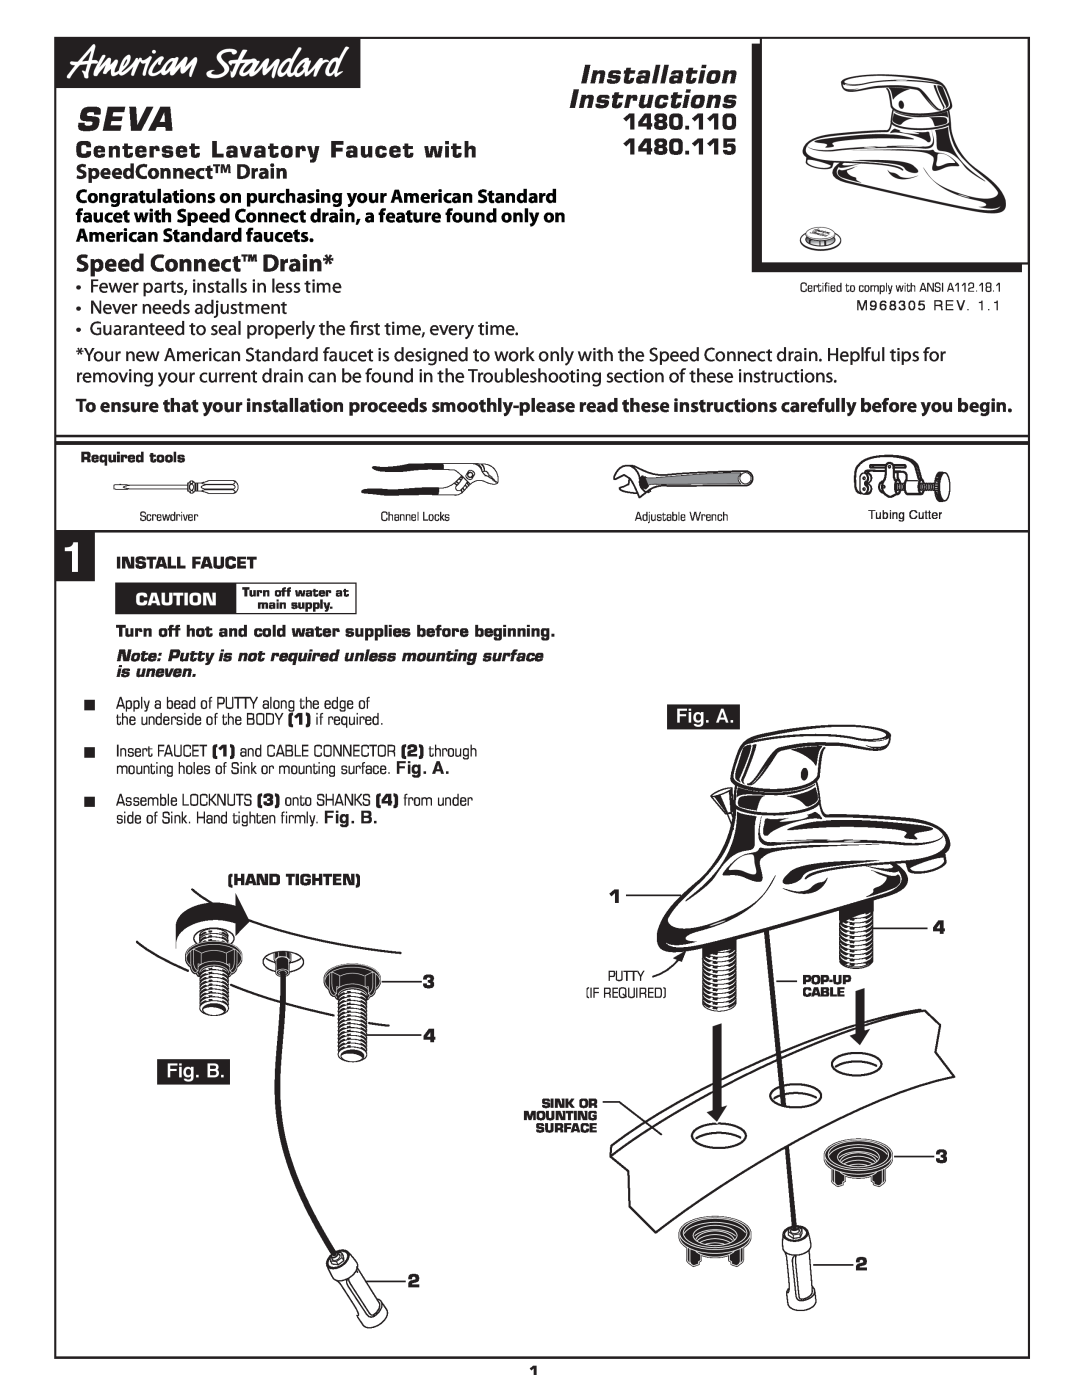 American Standard 1480.110 installation instructions Install Faucet, Seva, Installation, Instructions, Speed Connect Drain 